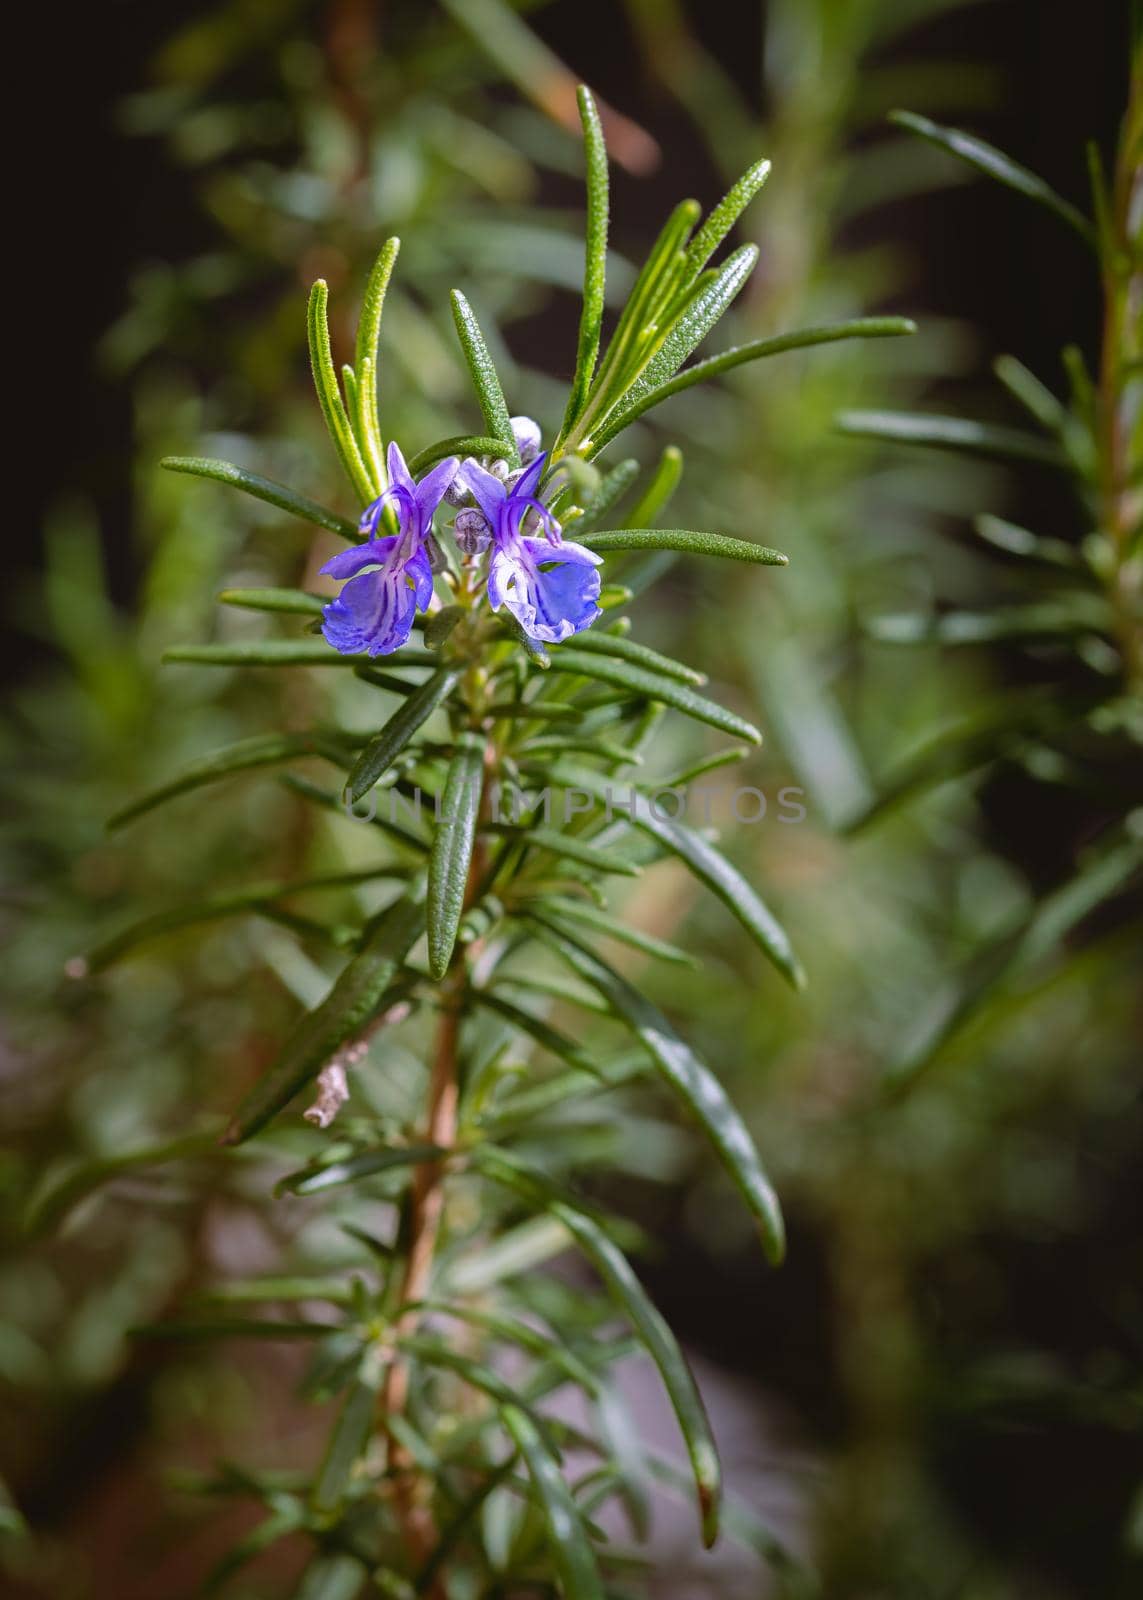 Closeup of a violet Rosemary Flower in Italy during spring. Rosemary is an excellent plant to be used a seasoning for cooking and has also good medicinal properties